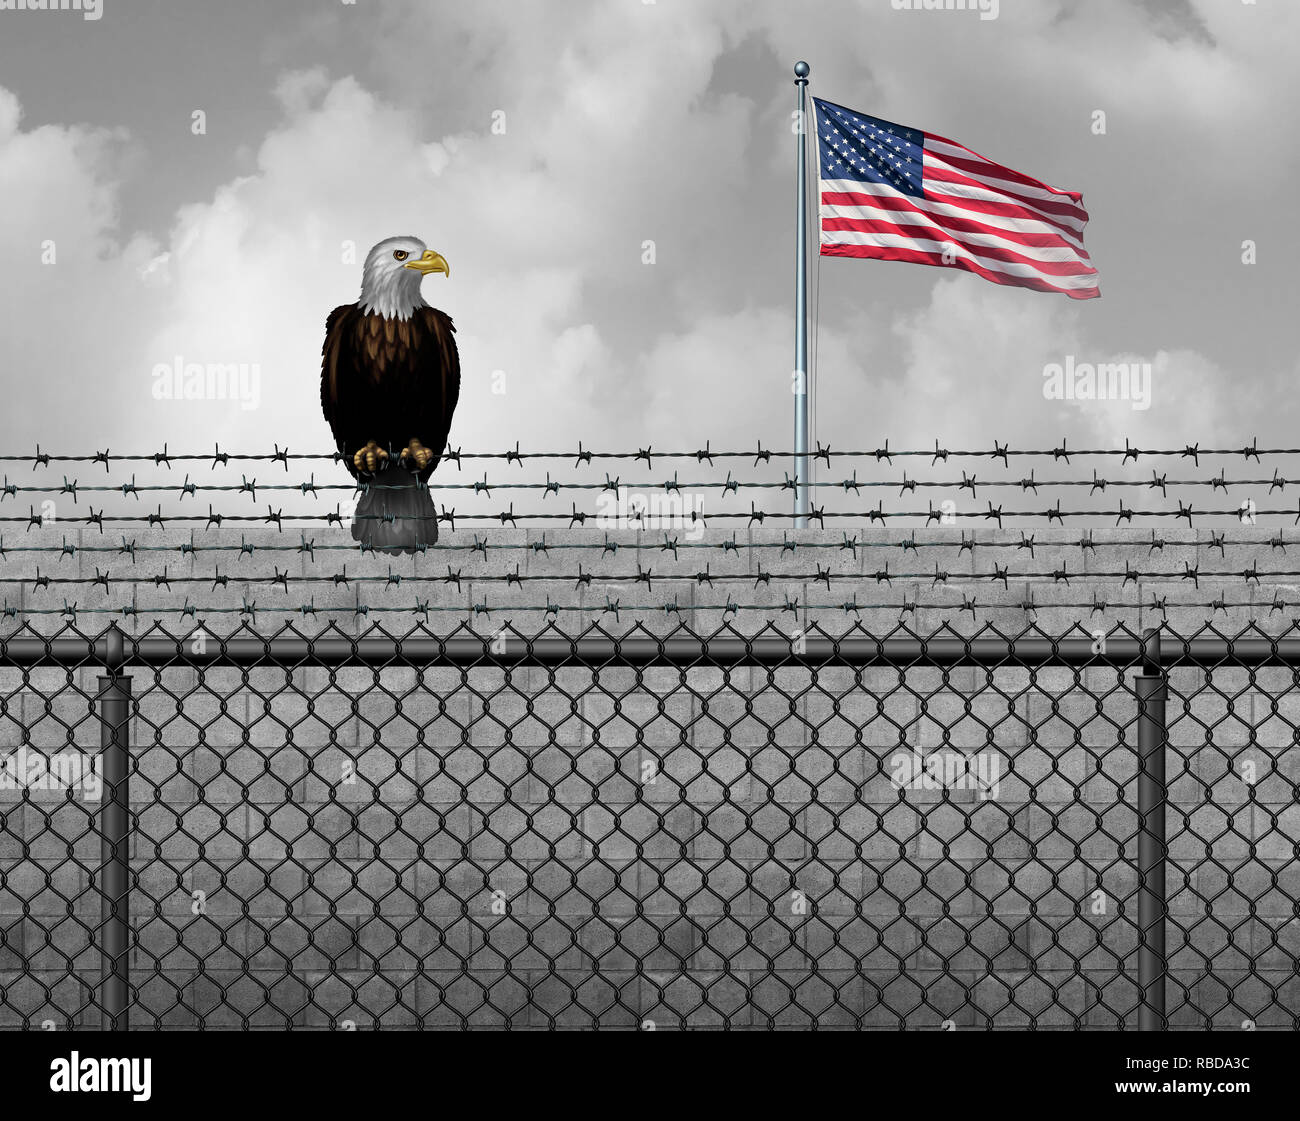 American eagle on security border as an illegal or legal immigration and customs barrier or government shutdown concept with a United States flag. Stock Photo